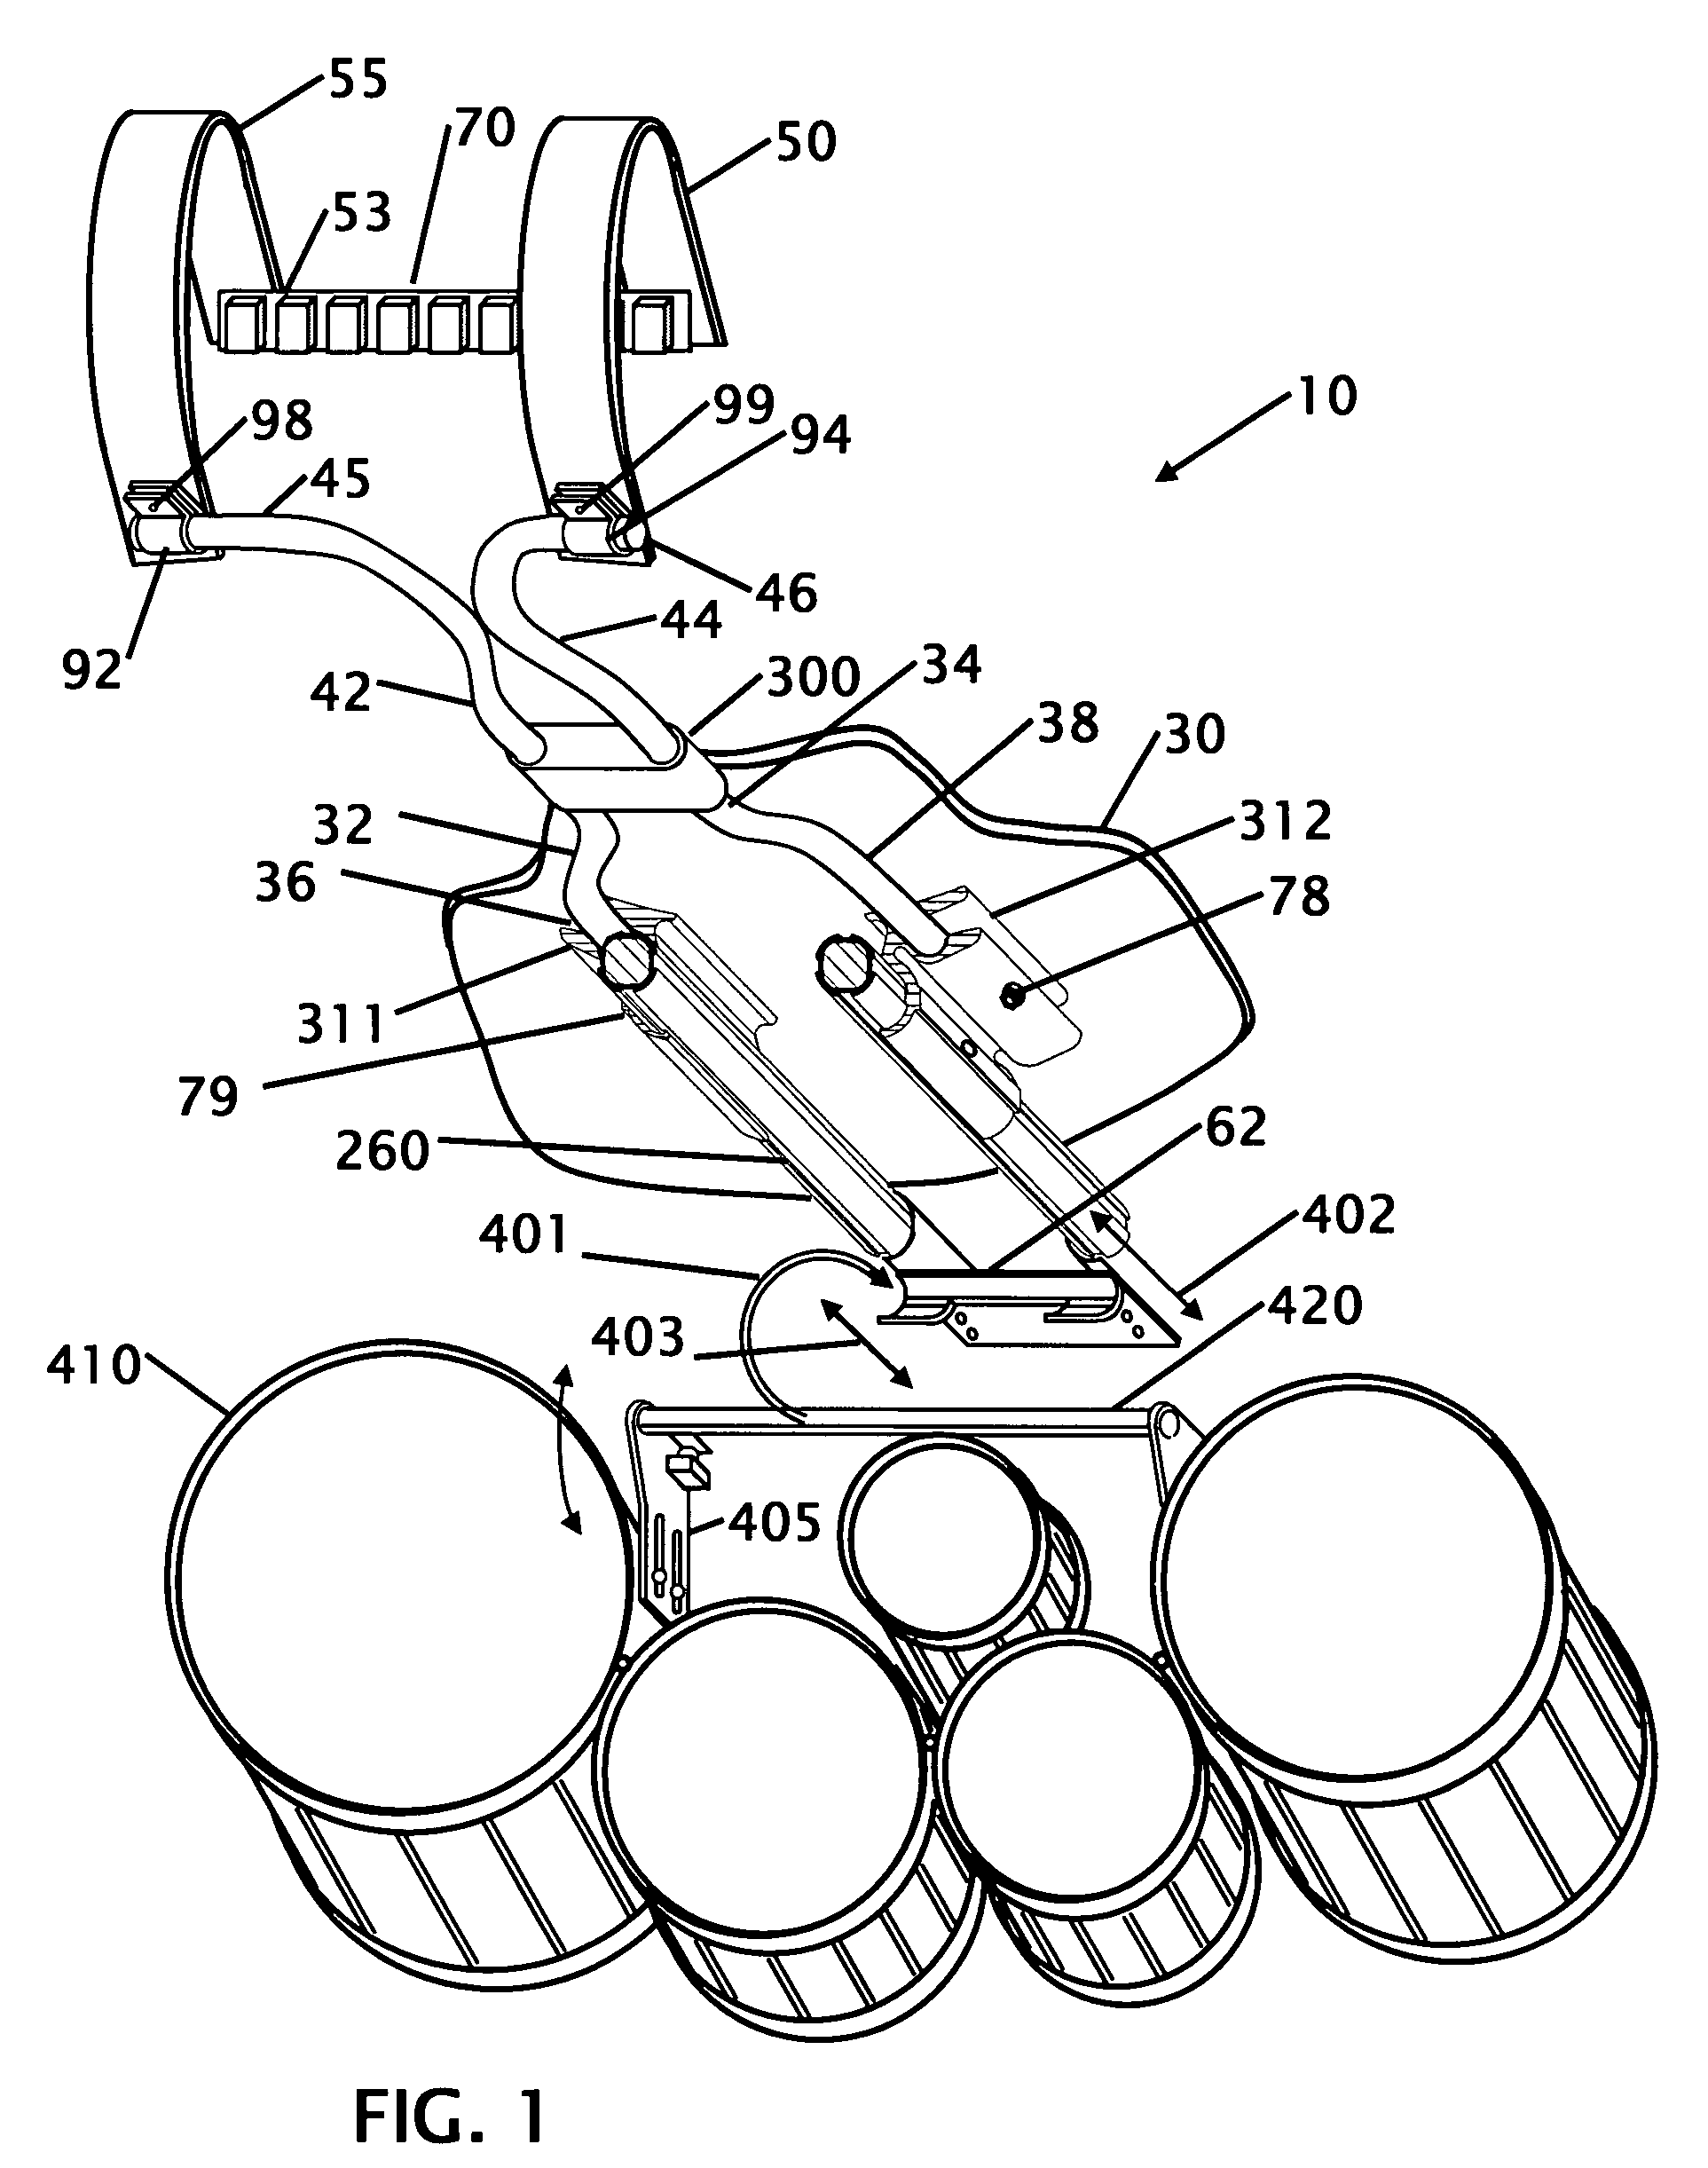 Carrier with adjustable parallel track structure for retaining musical instruments